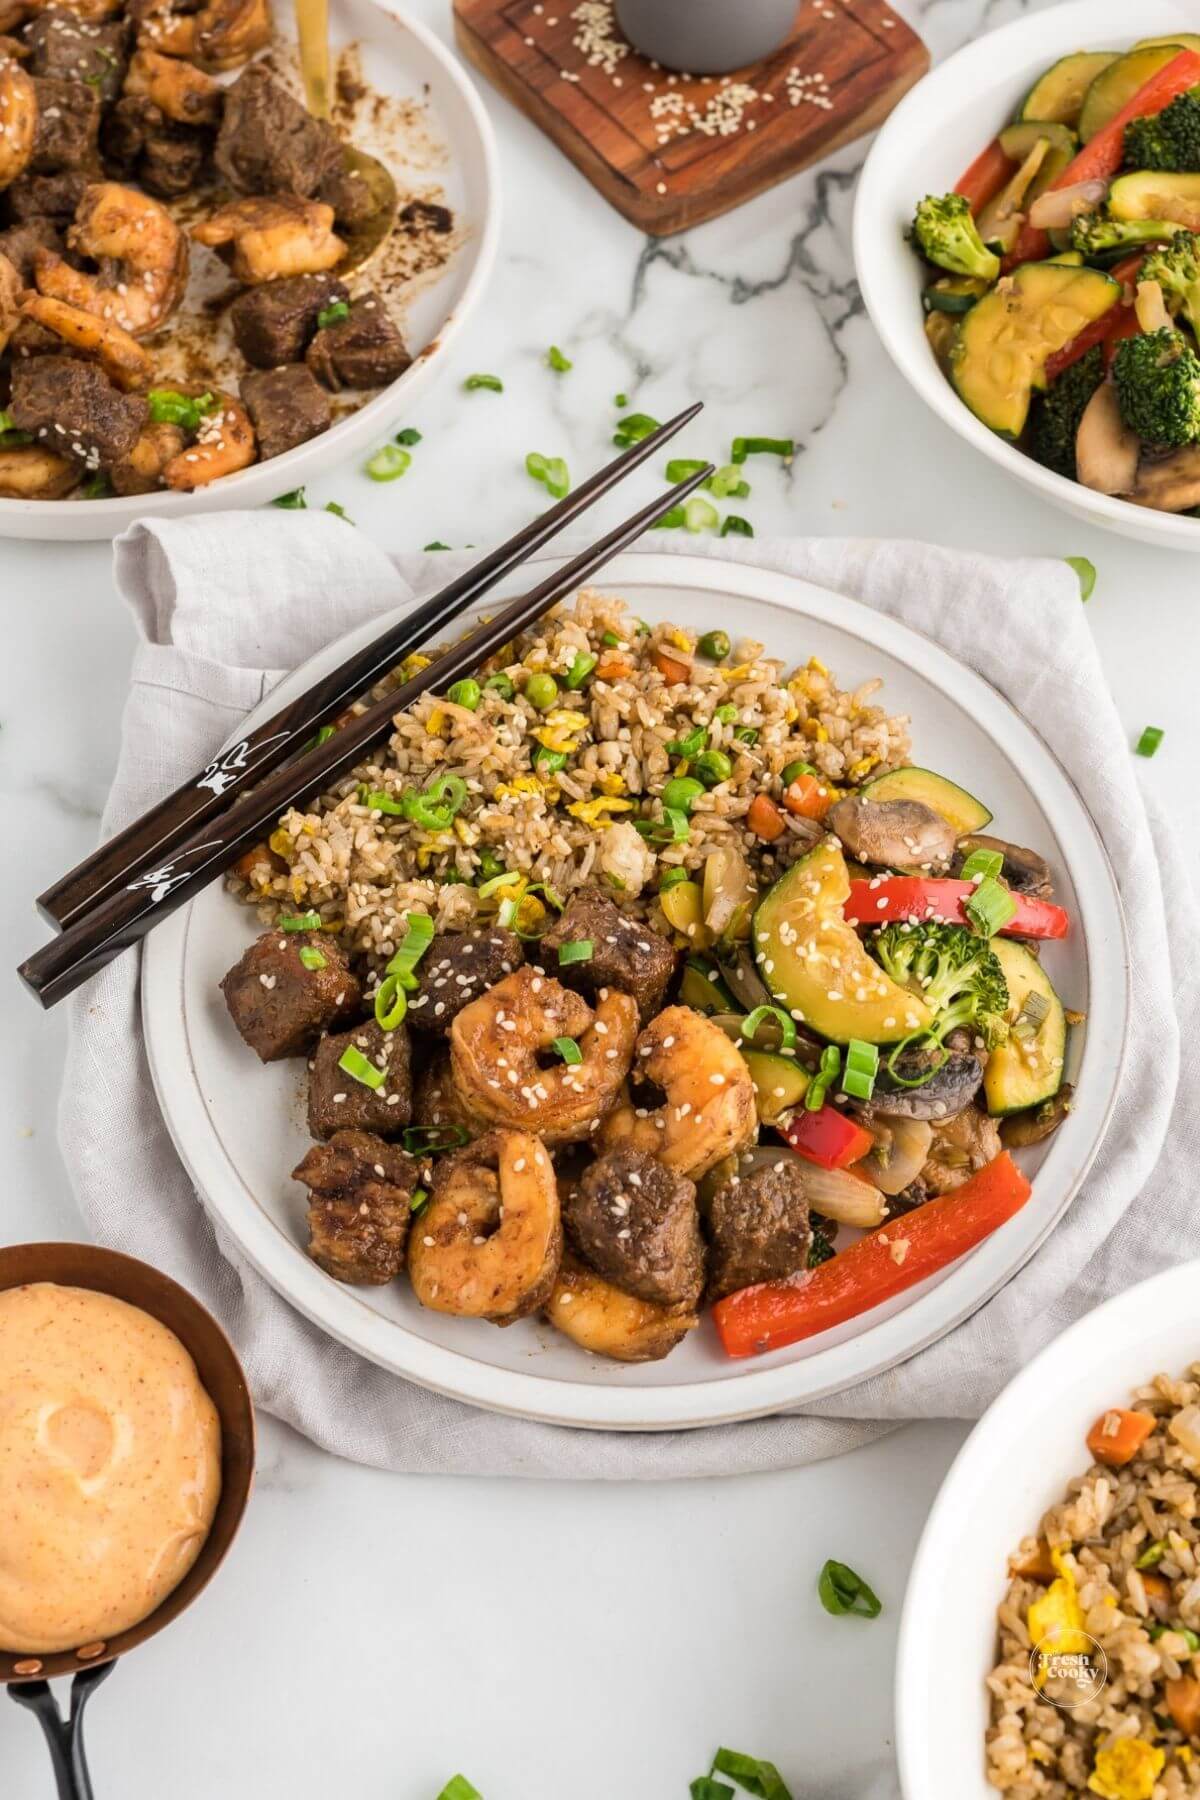 Hibachi steak and shrimp with hibachi vegetables and fried rice with chopsticks.